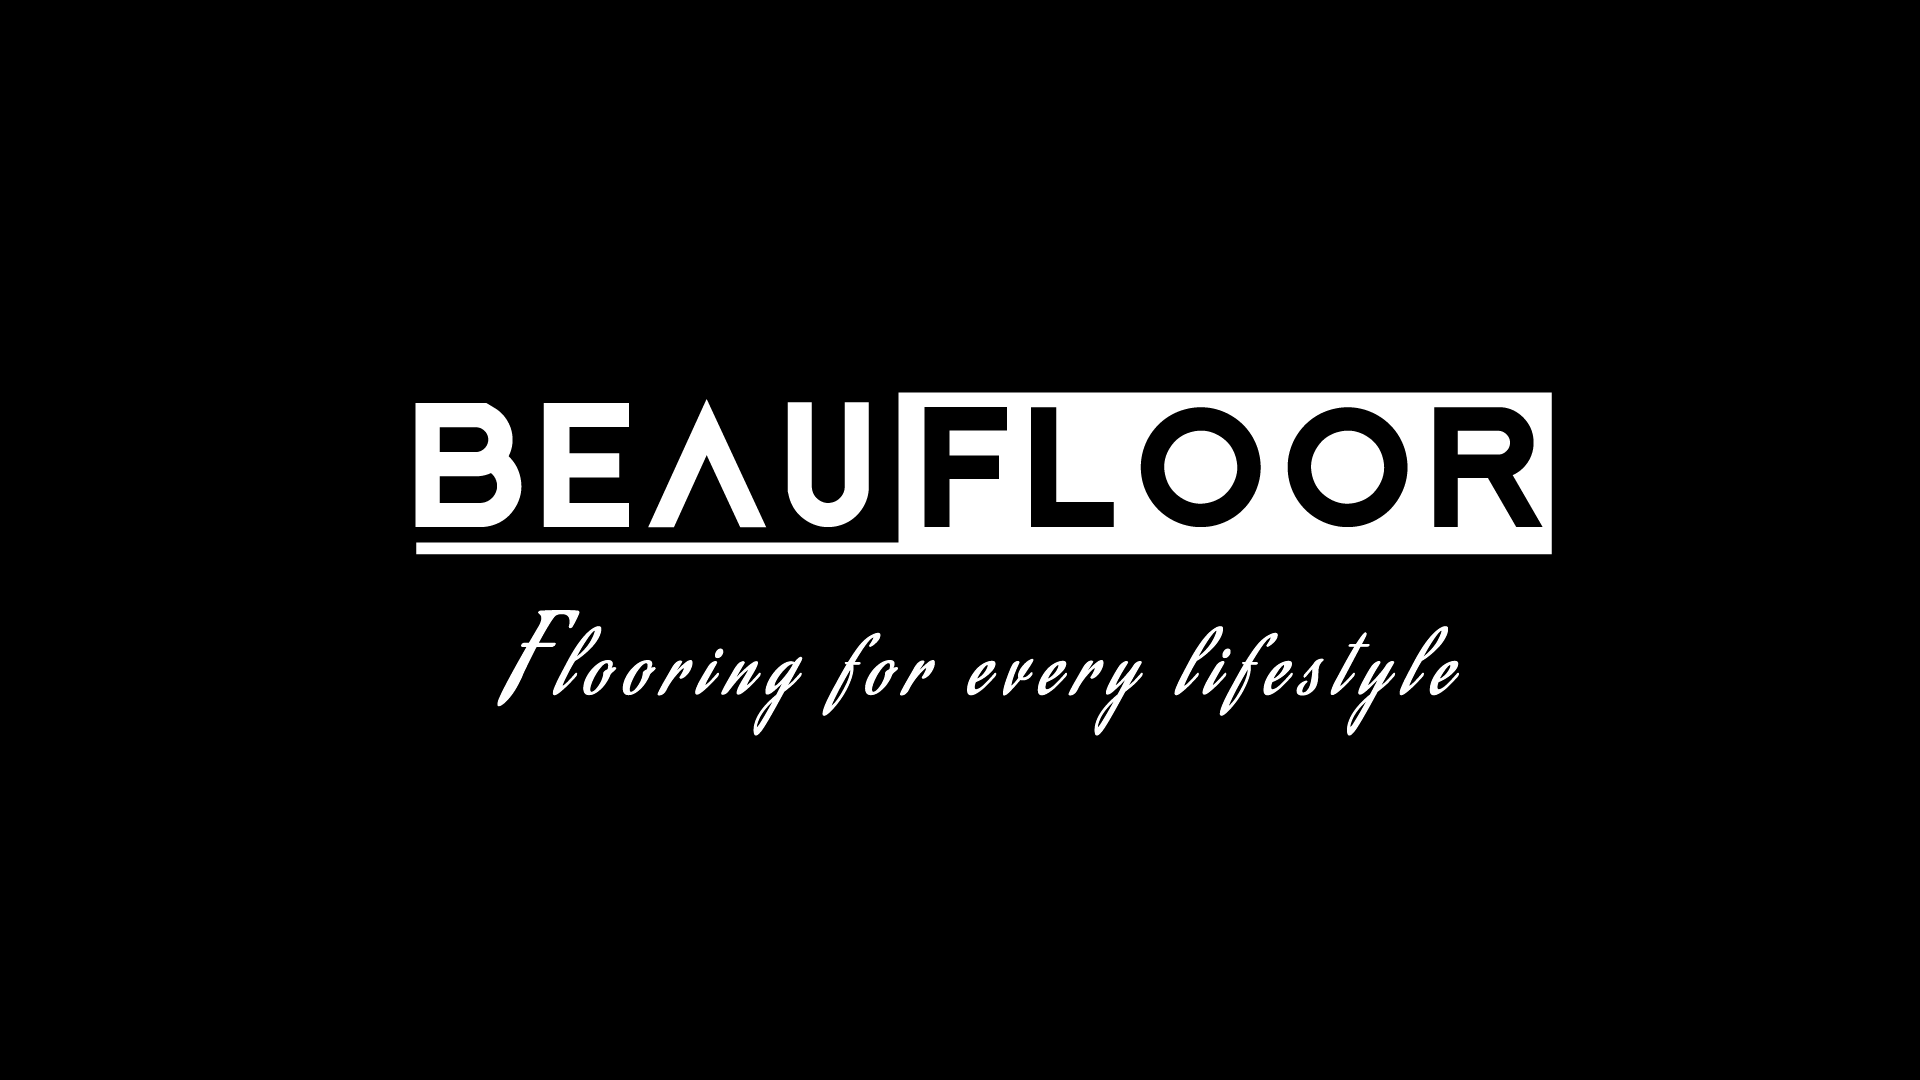 Beau Floor offers the highest quality flooring products with the most competitive pricing and distinct aesthetics – classic flooring, redesigned in long-lasting and modern styles. Our range includes our top quality ALFA & BOSTON HYBRID and CLASSIC LAMINATE flooring, with outstanding features and built to last. Beau Floor has been supplying quality flooring materials and accessories to many major retailers in Victoria and nationwide, All the products have been tested by AWTA Australia. All our products are covered by Lifetime Structural Warranty, 10 Years Commercial Surface Warranty and 25 Years Residential Surface Warranty. Beau Floor highly values clients’ satisfaction, and providing the most professional and efficient customer service has always been our number one goal. As one of the fastest-growing contenders in the Australian flooring market, Beau Floor seeks to extend the opportunity for potential clients to collaborate. Together, we continue to deliver the best quality products and beyond.